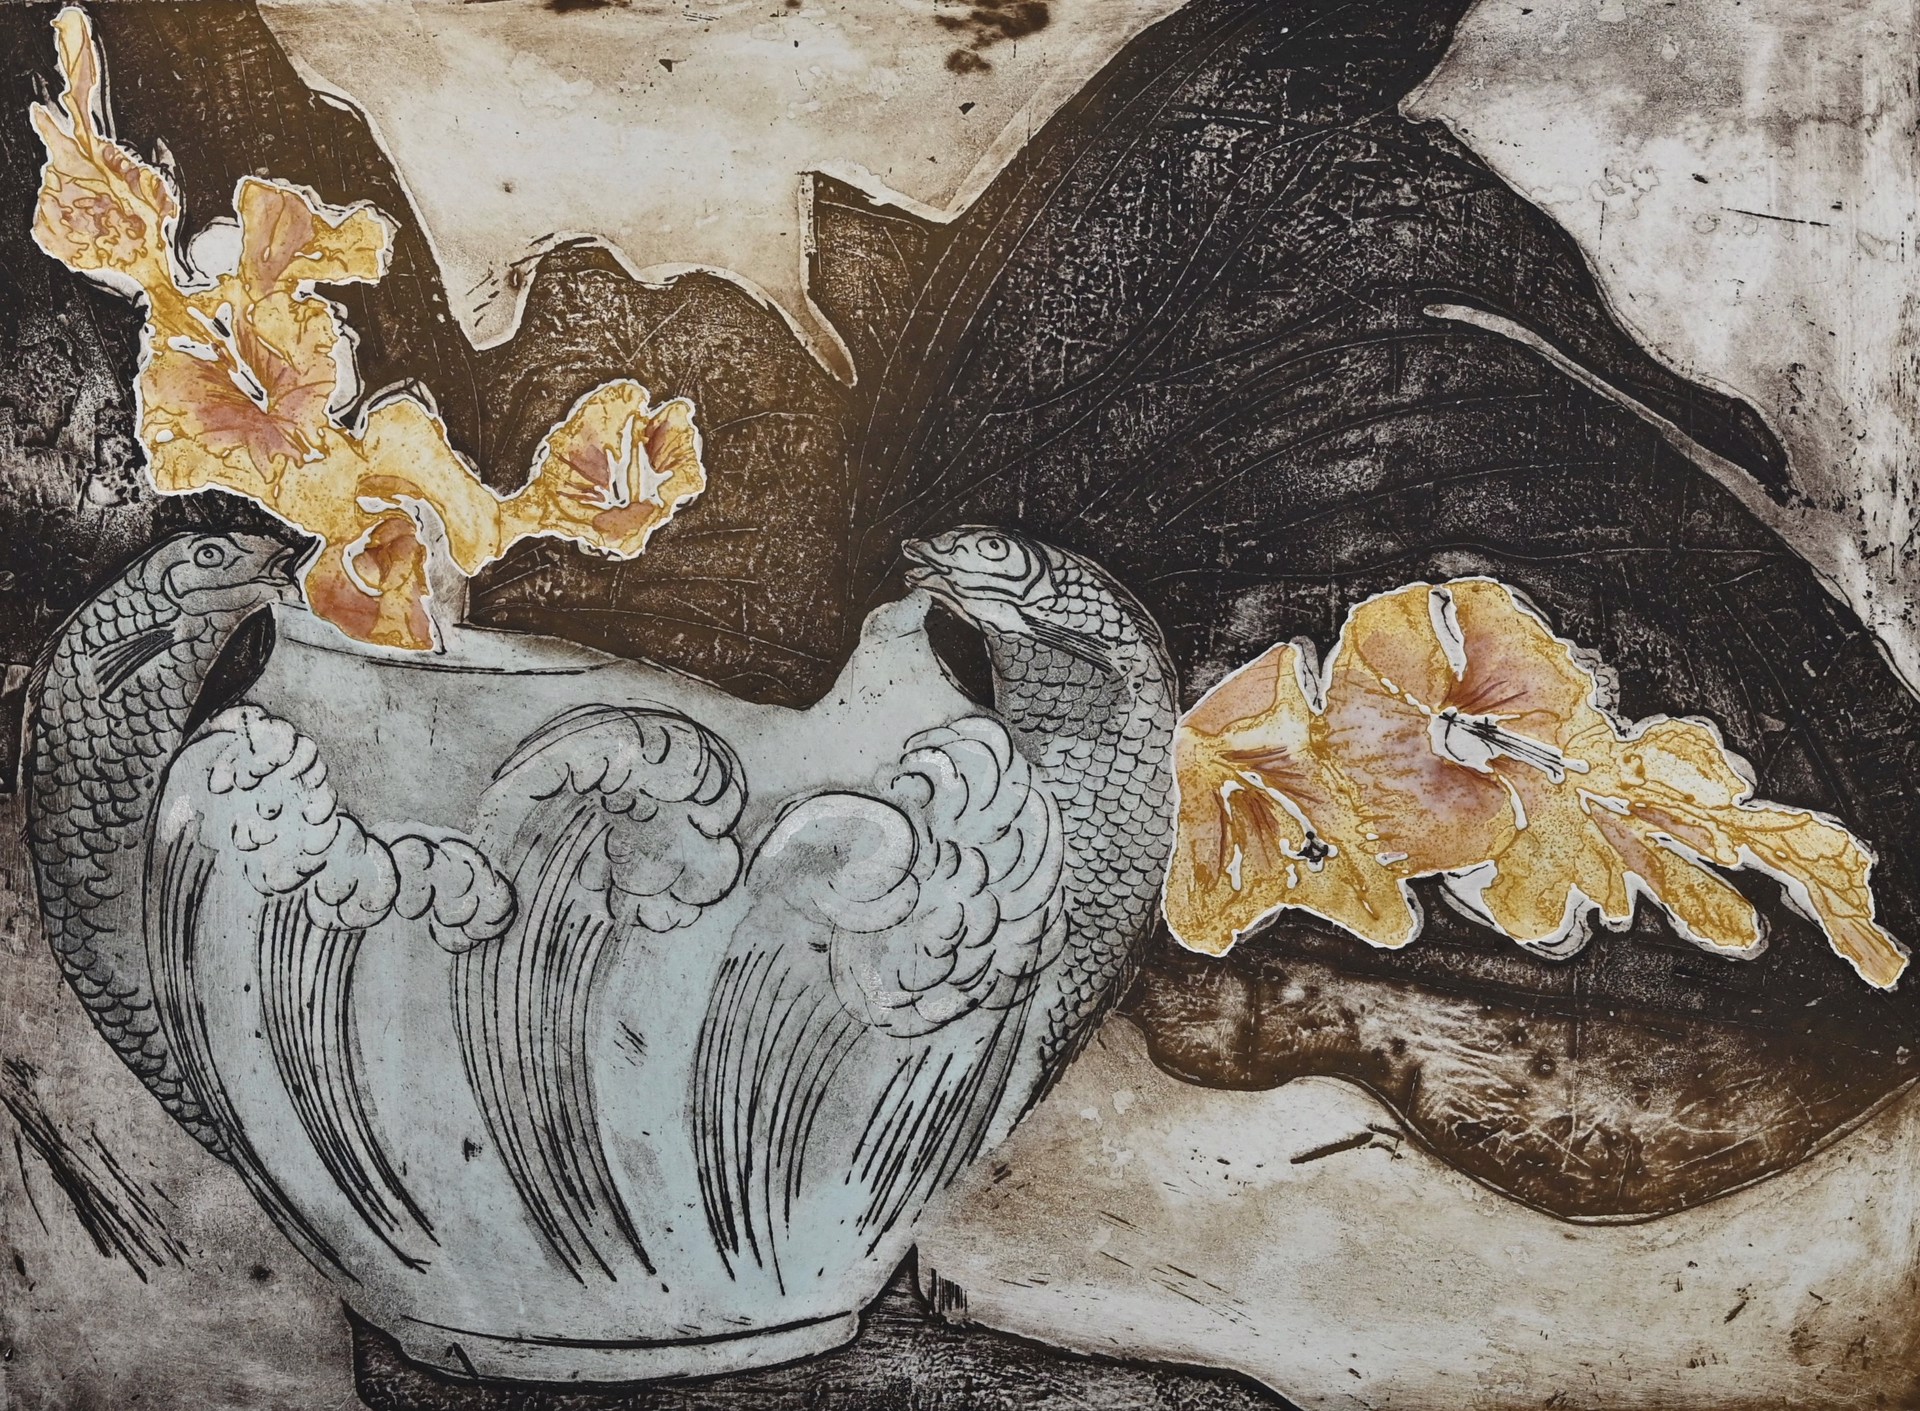 Newcomb Pottery with Gladiolas by Frances Swigart